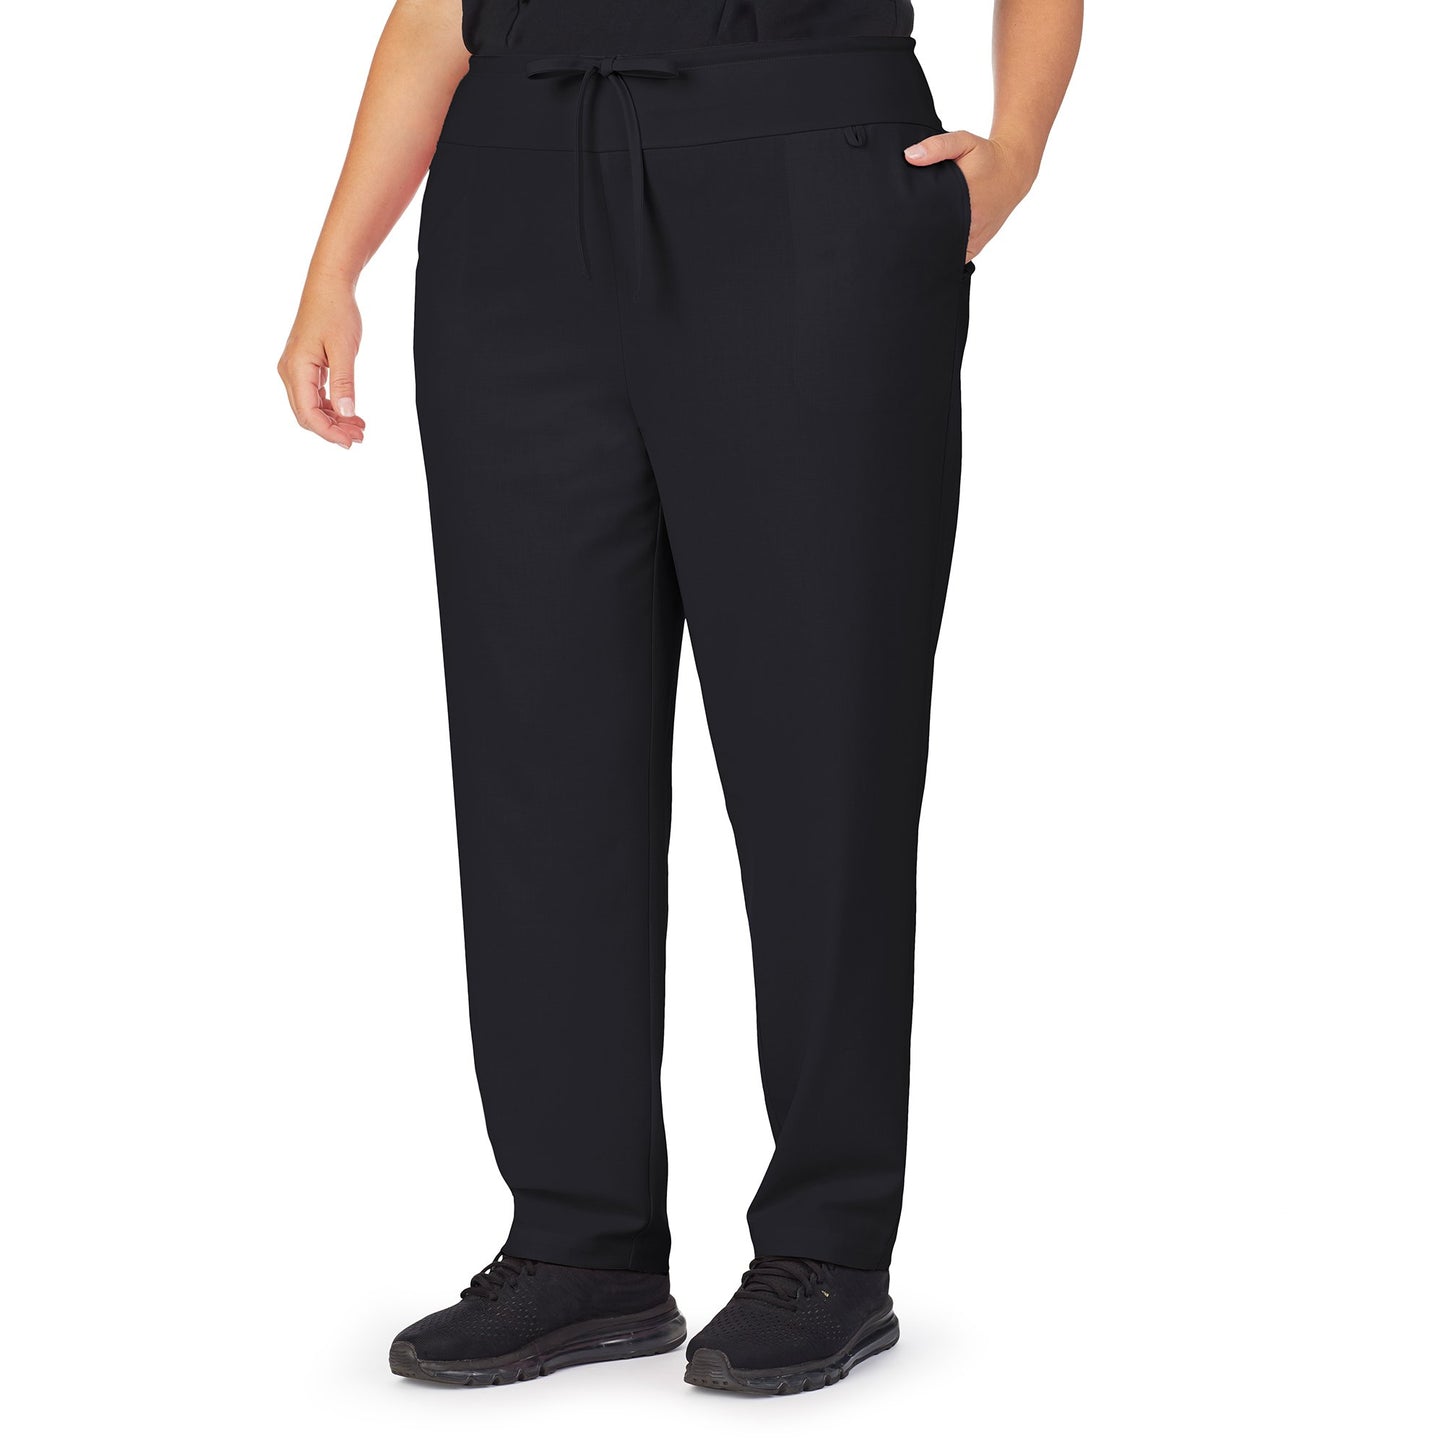 Black;Model is wearing size 1X. She is 5’9.5”, Bust 43”, Waist 37”, Hips 49.5”.@A lady wearing black scrub classic pant plus.